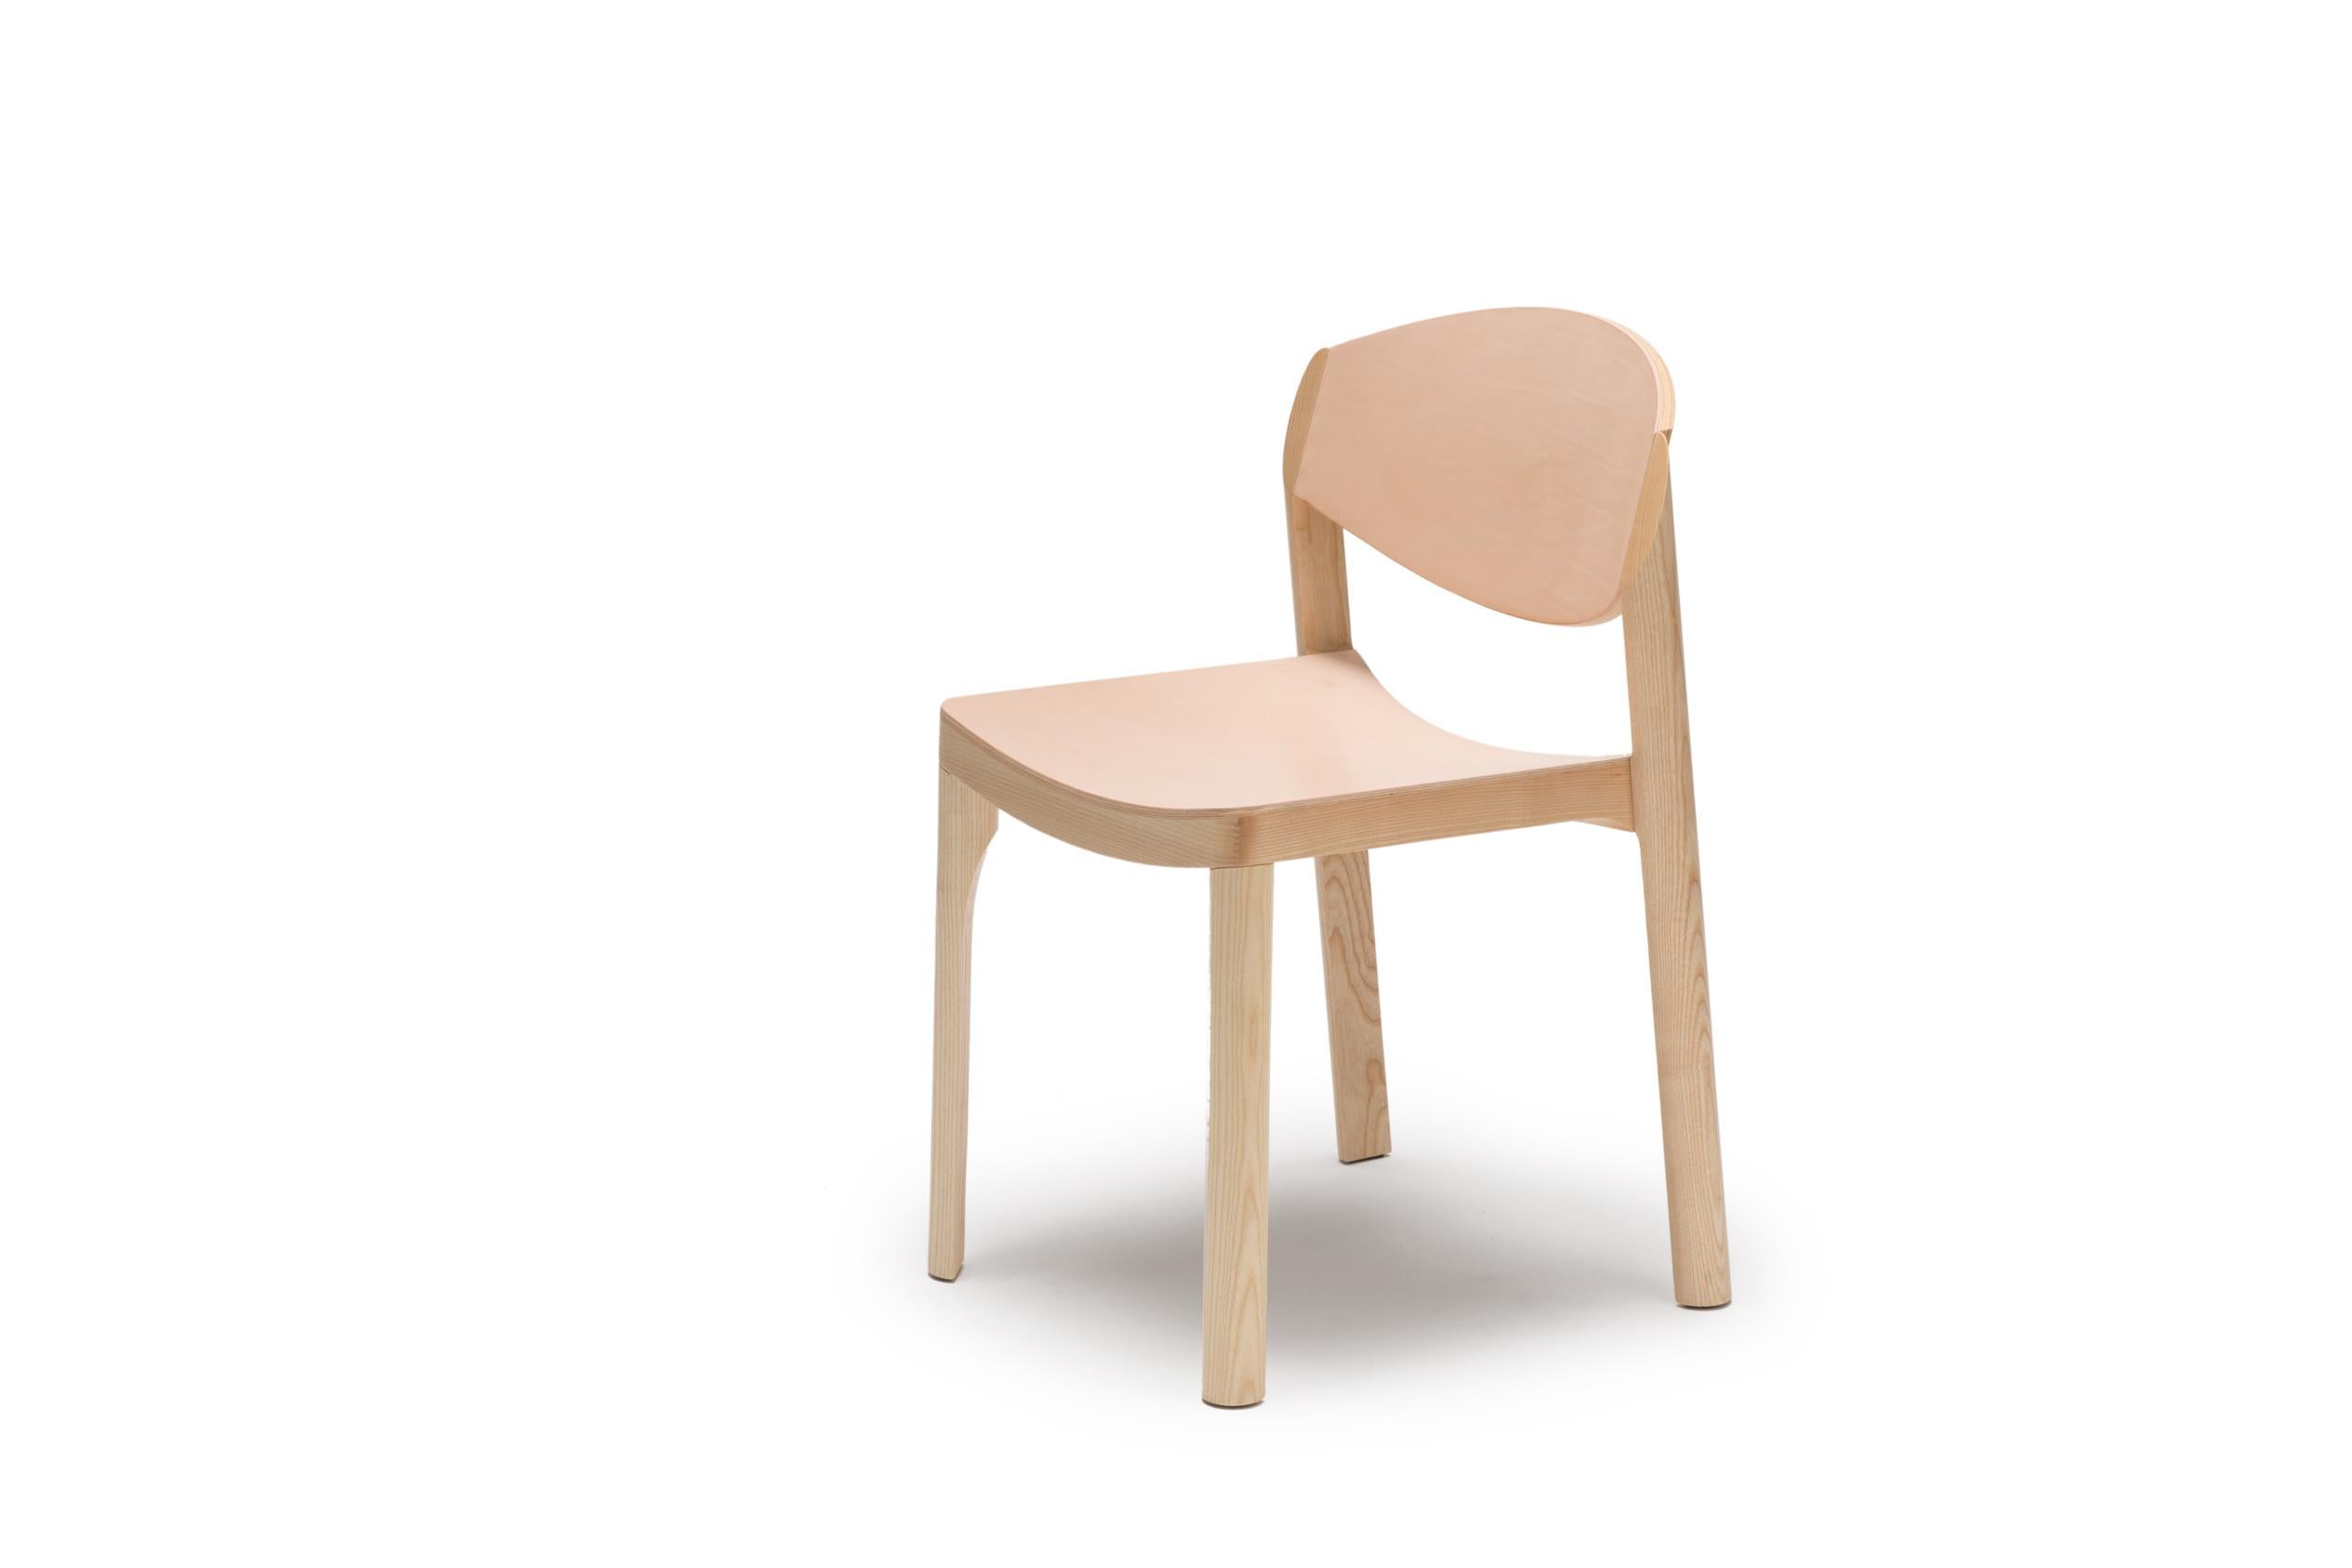 For Sale: Beige (6310) Established & Sons Mauro Chair by Mauro Pasquinelli